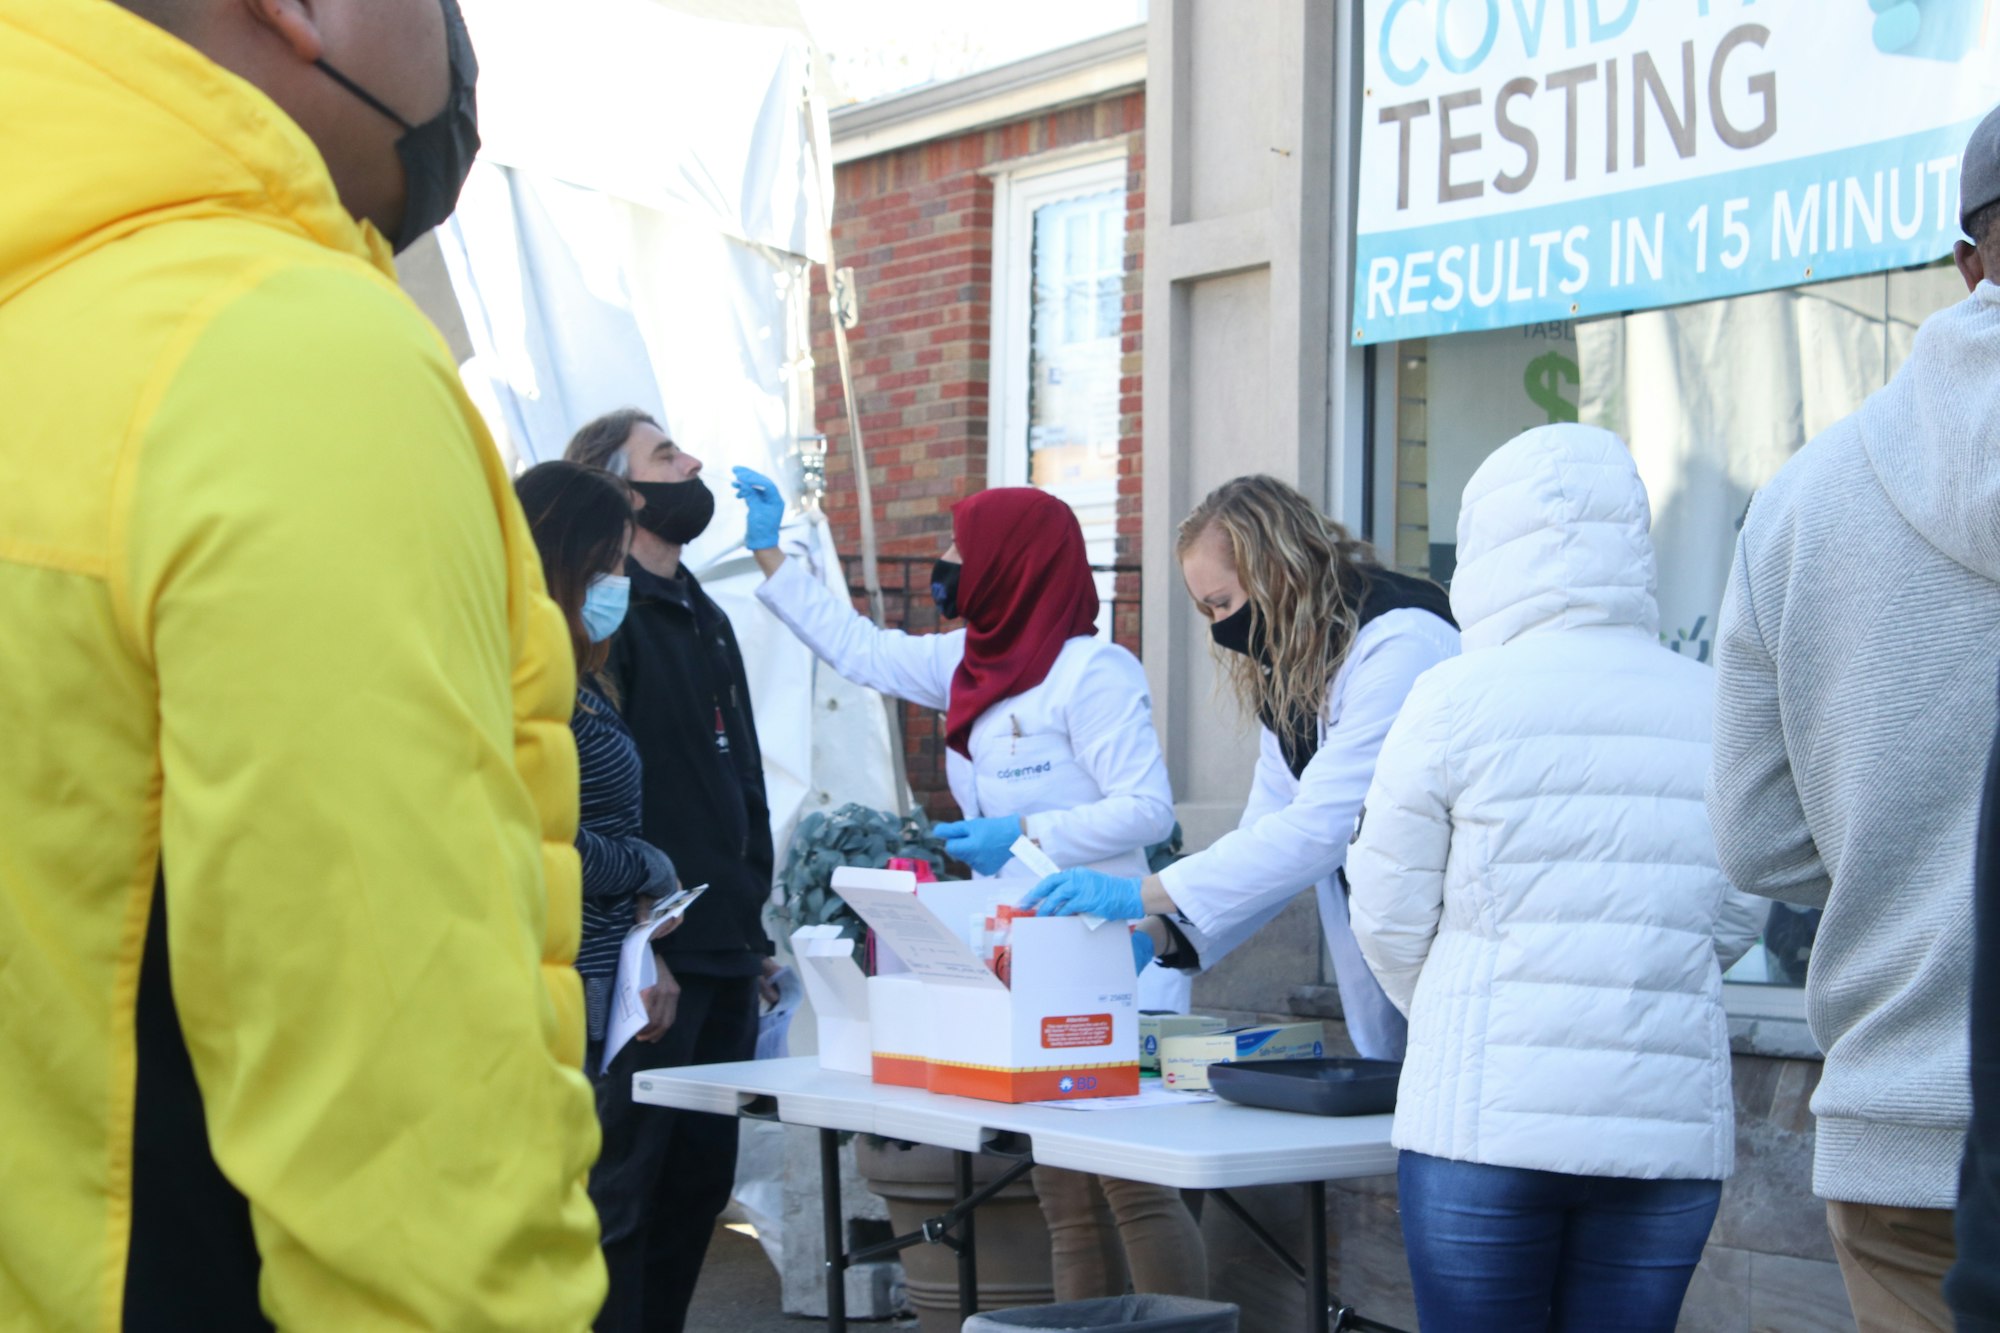 Masked medical workers conduct COVID testing outside a testing center.